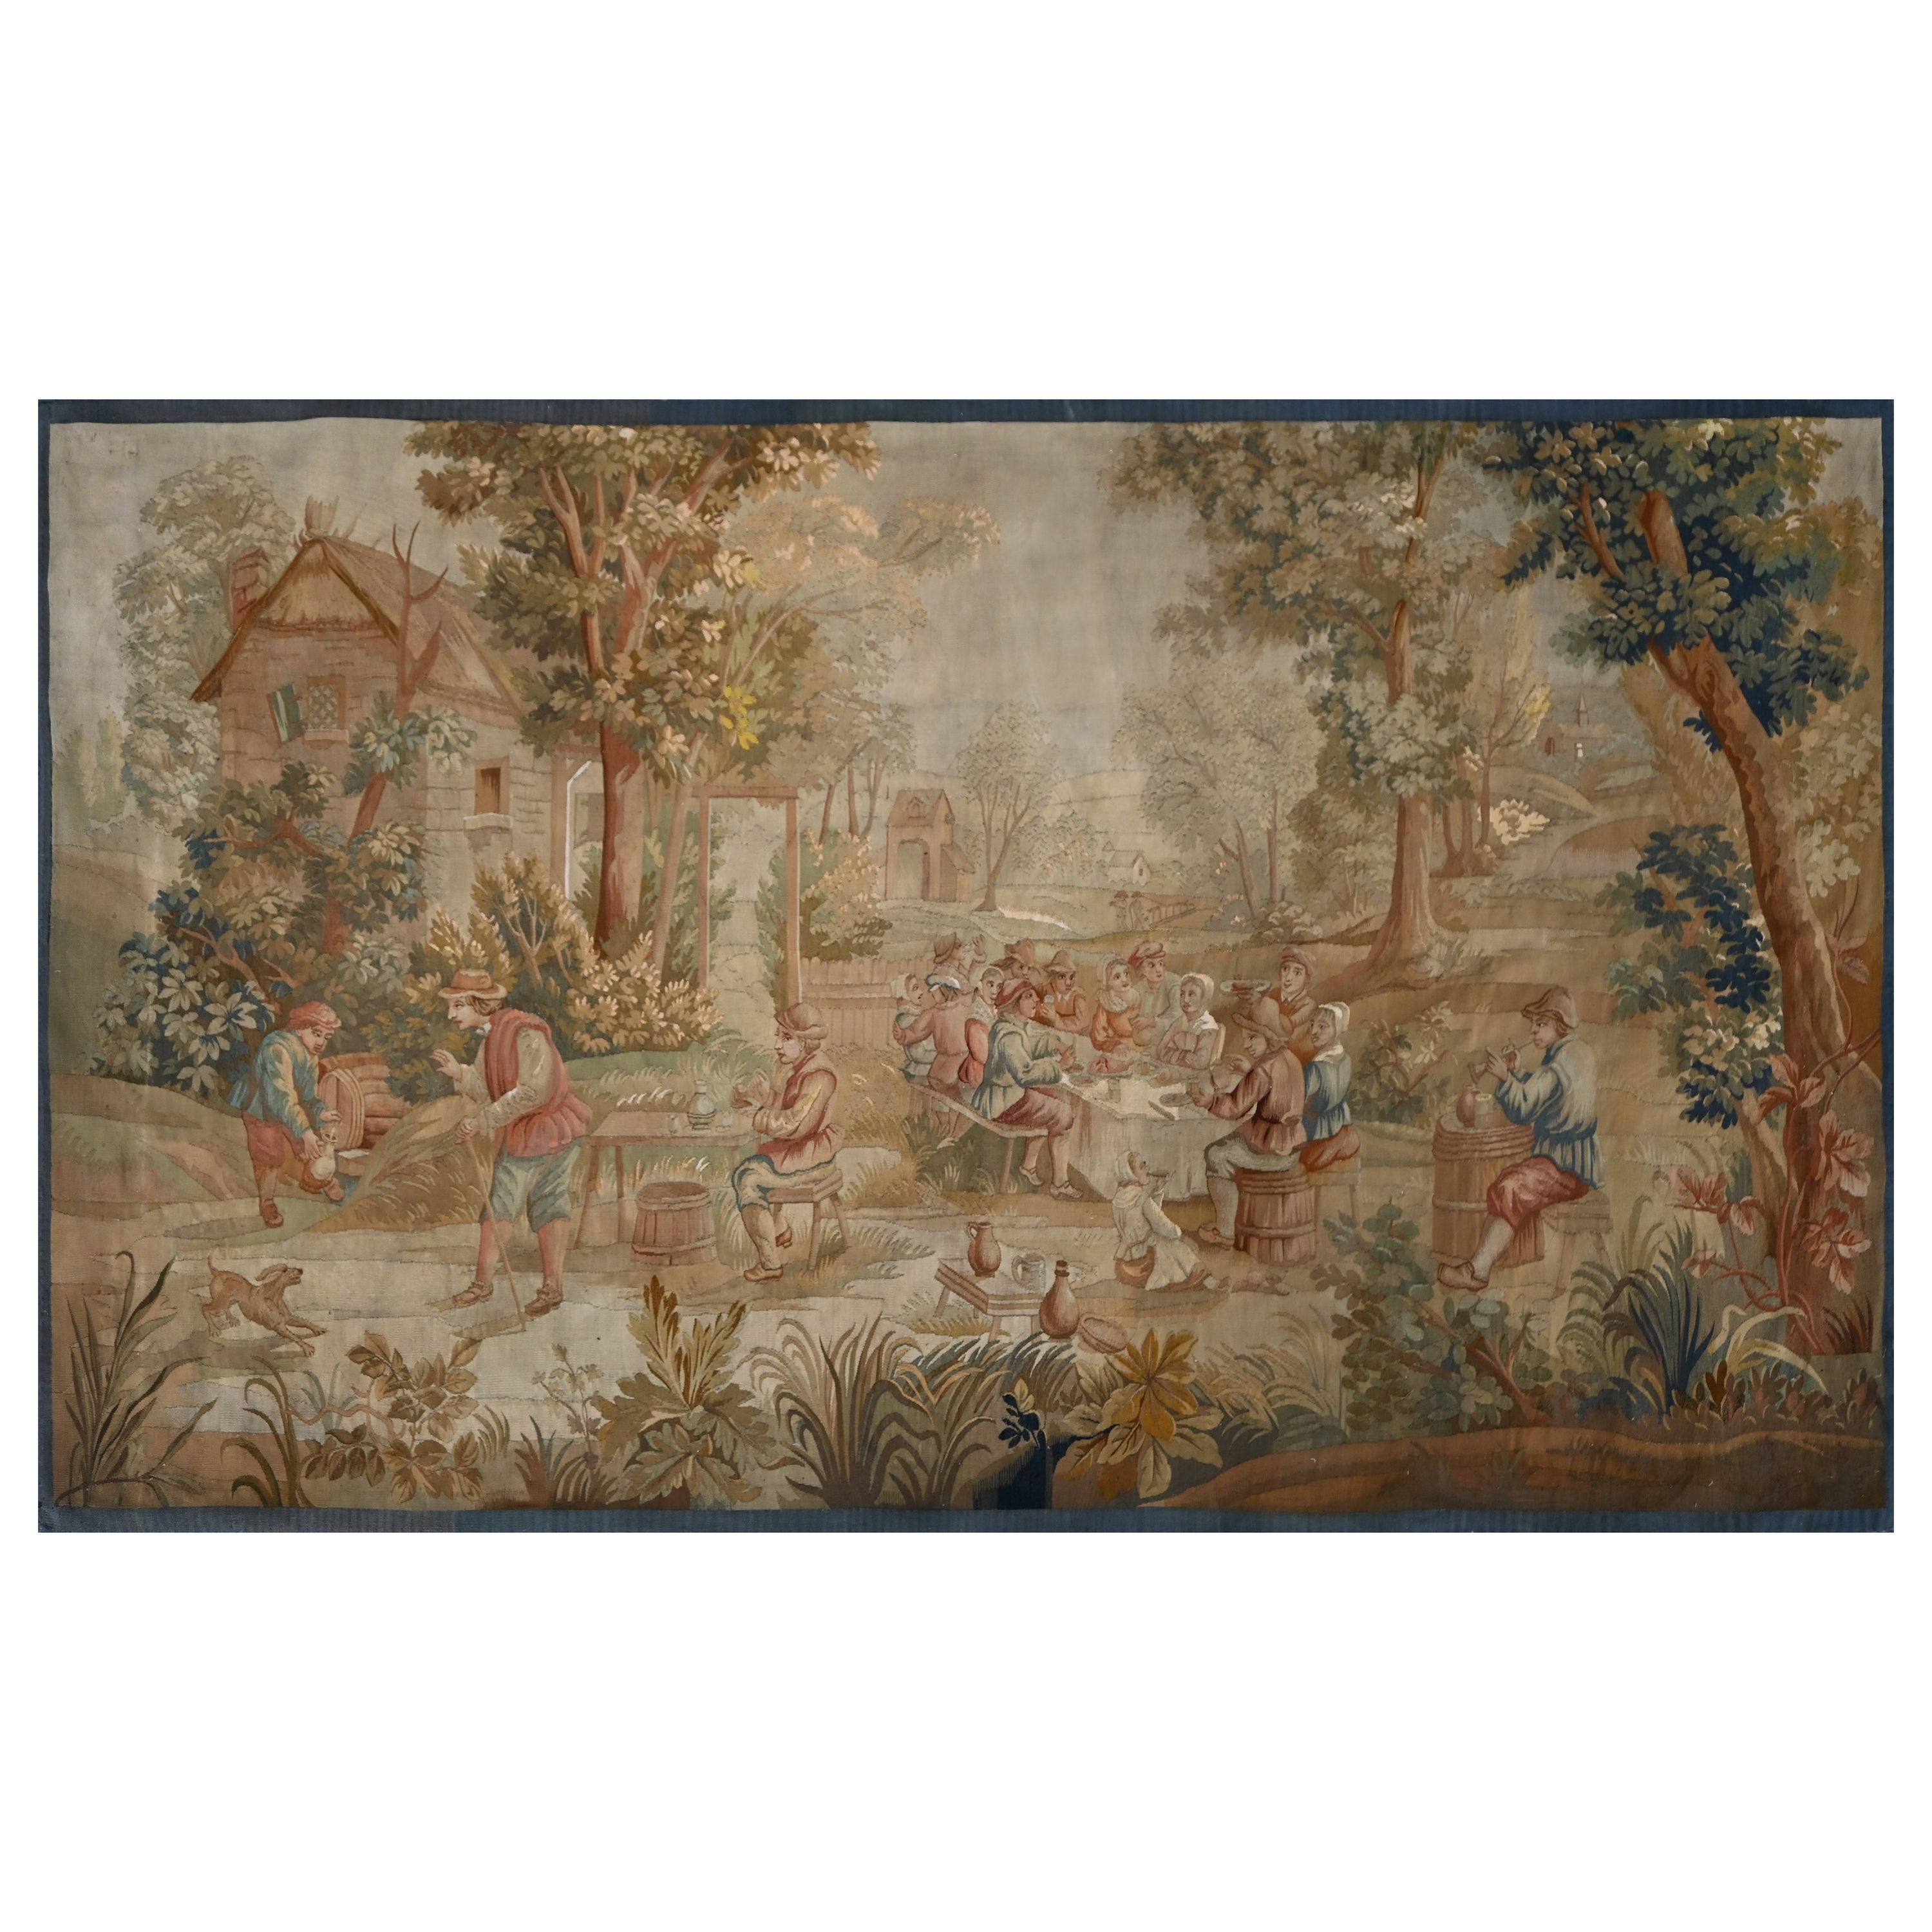 Tapestry Manufacture Aubusson 19th Century "the Banquet" - No. 1388 For Sale